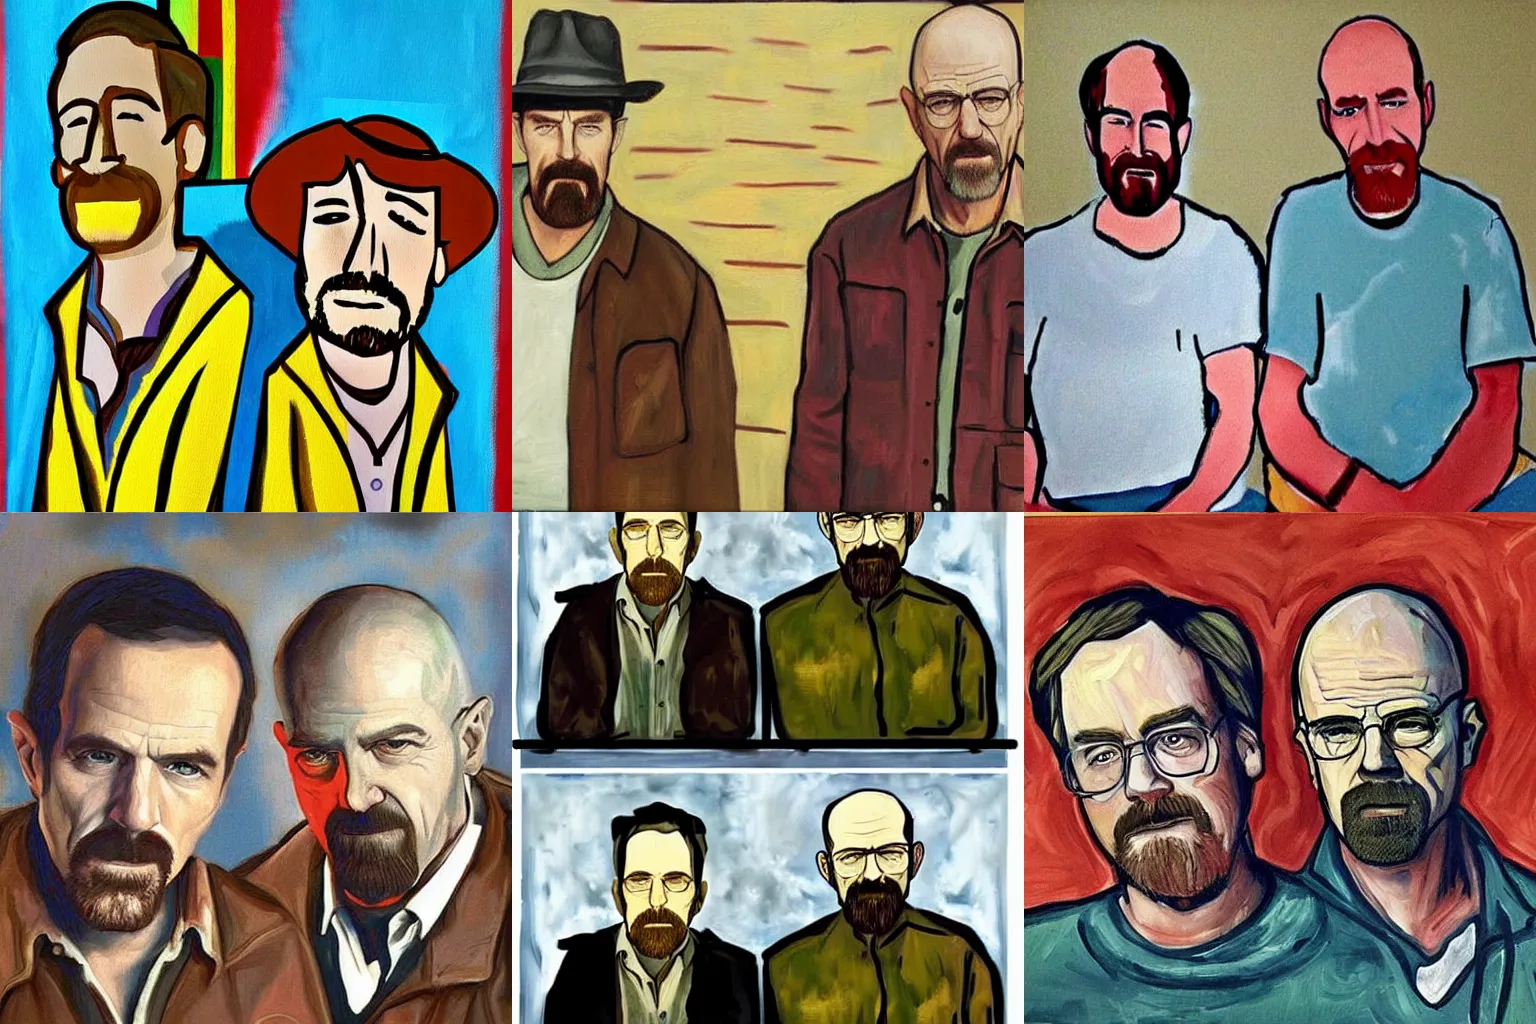 Prompt: Walt and Jesse from Breaking Bad, painting by Picasso